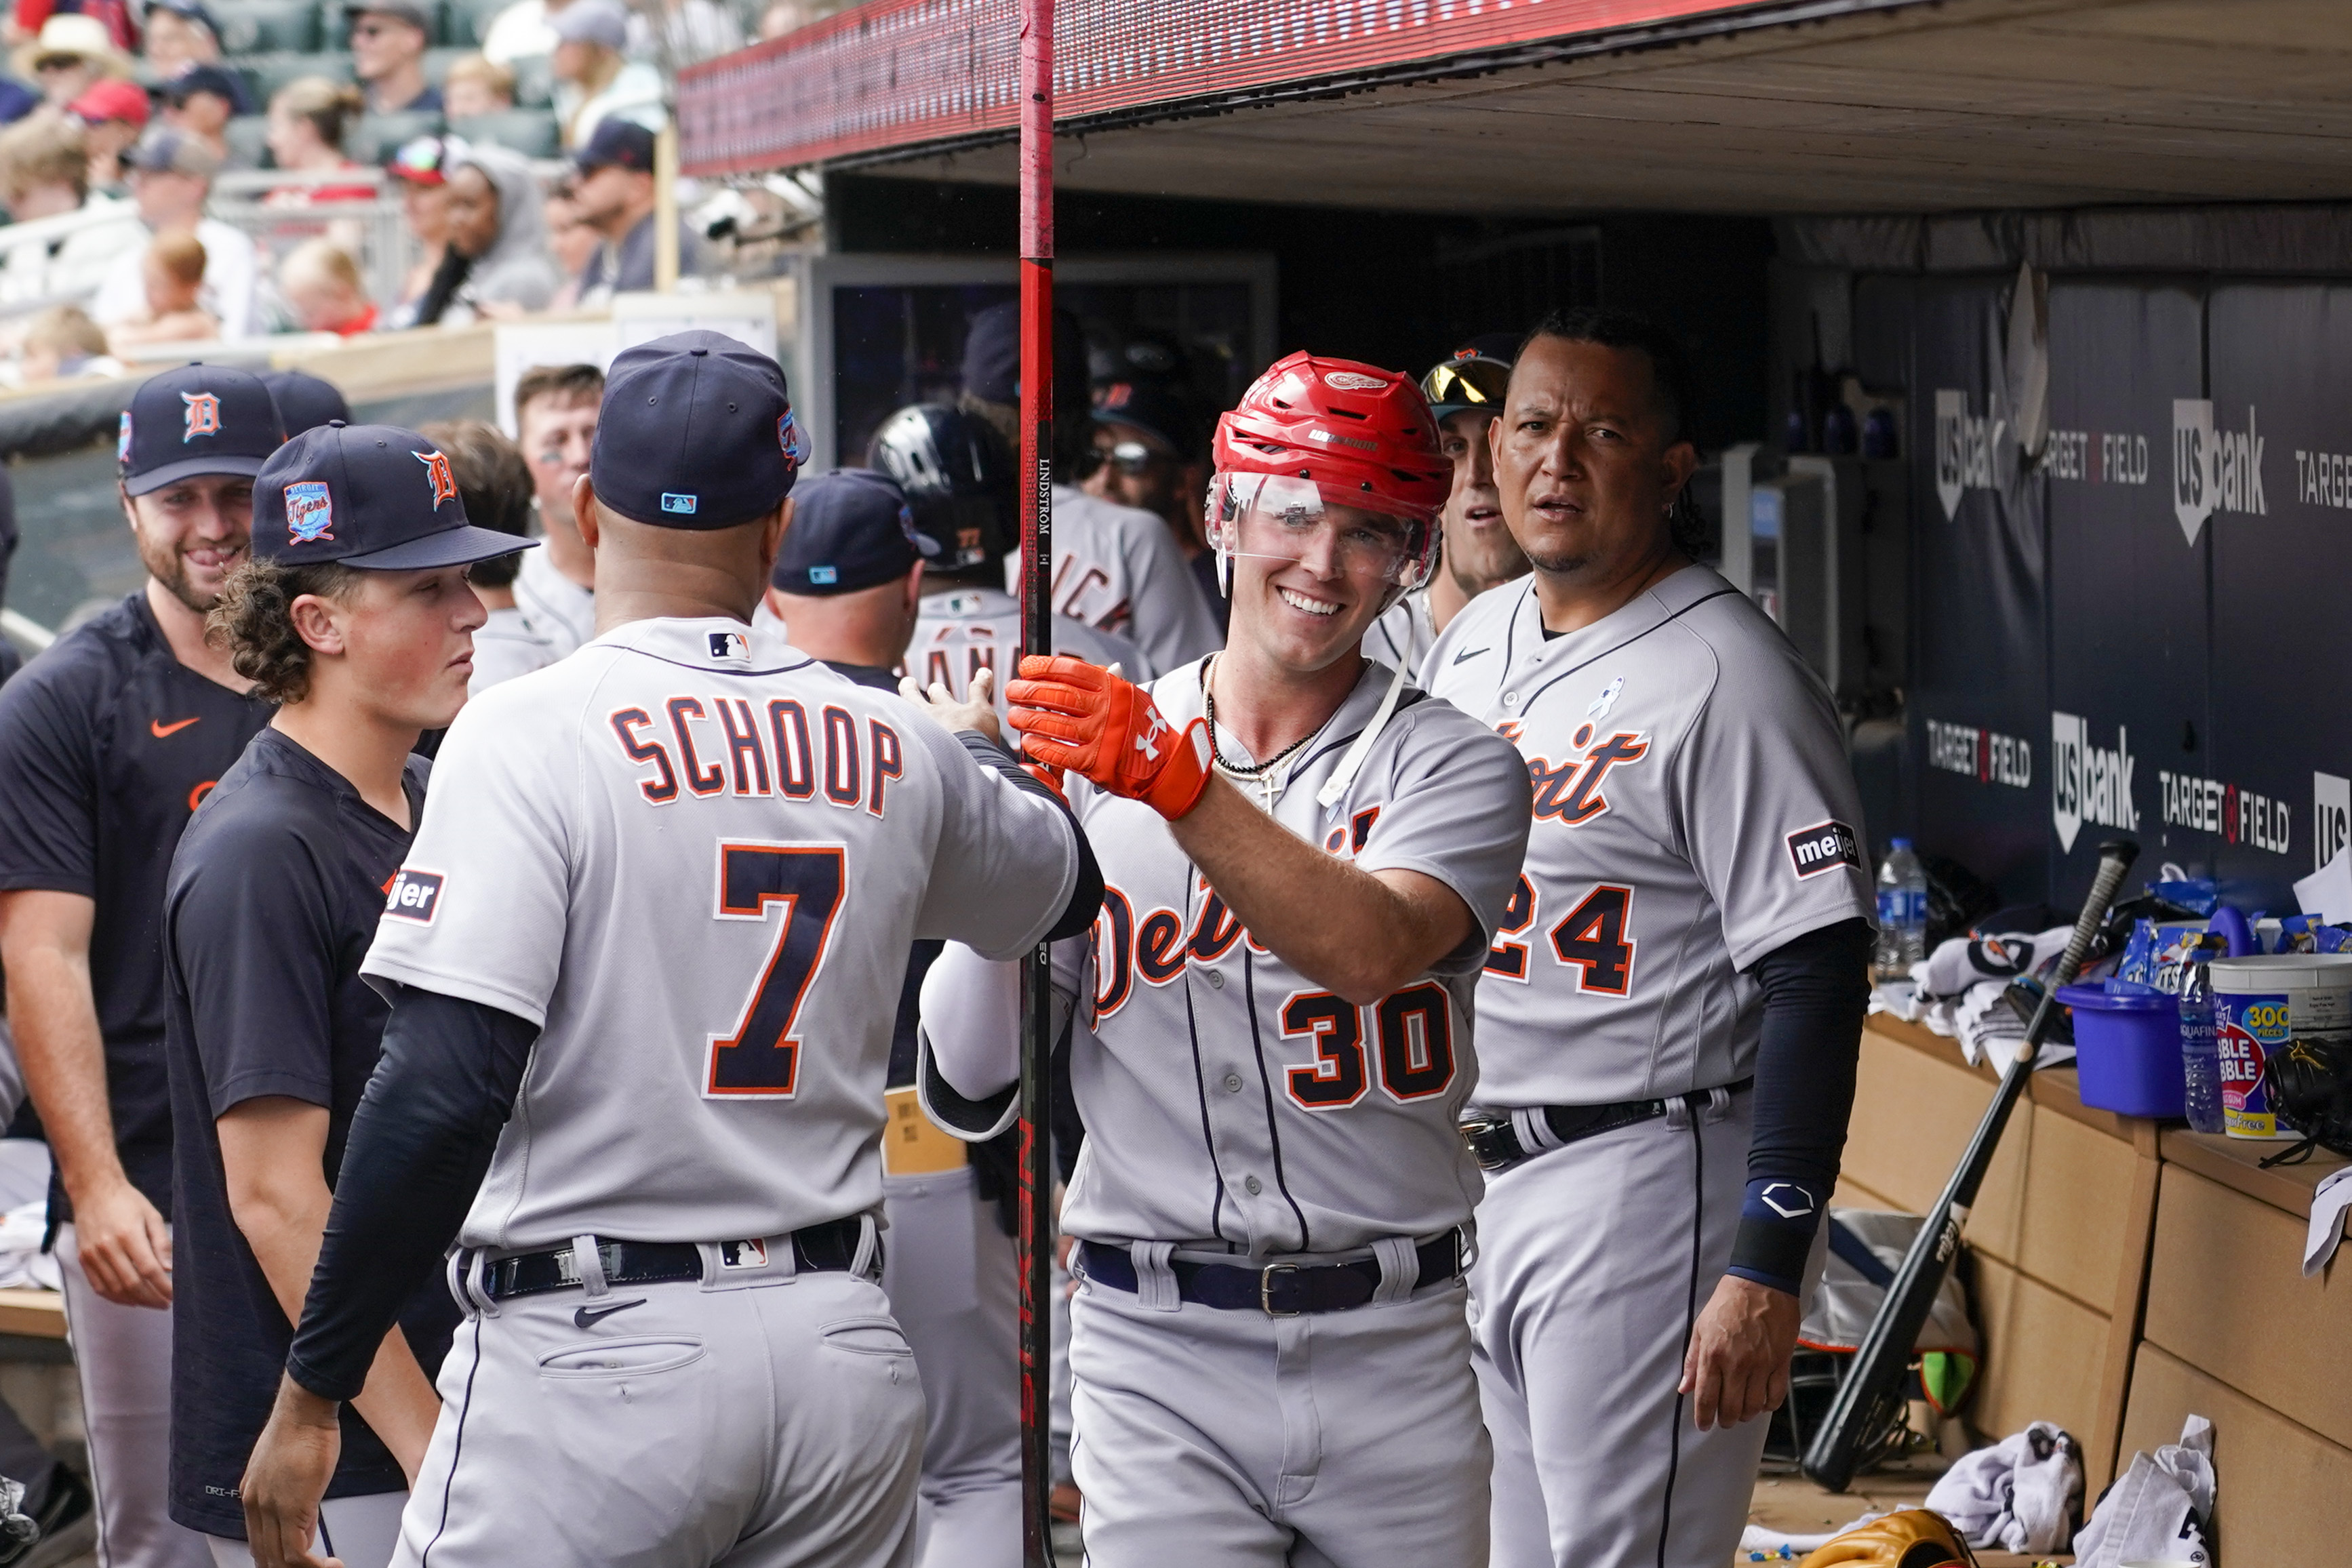 Tigers snuff out late rally to top Twins, win series 